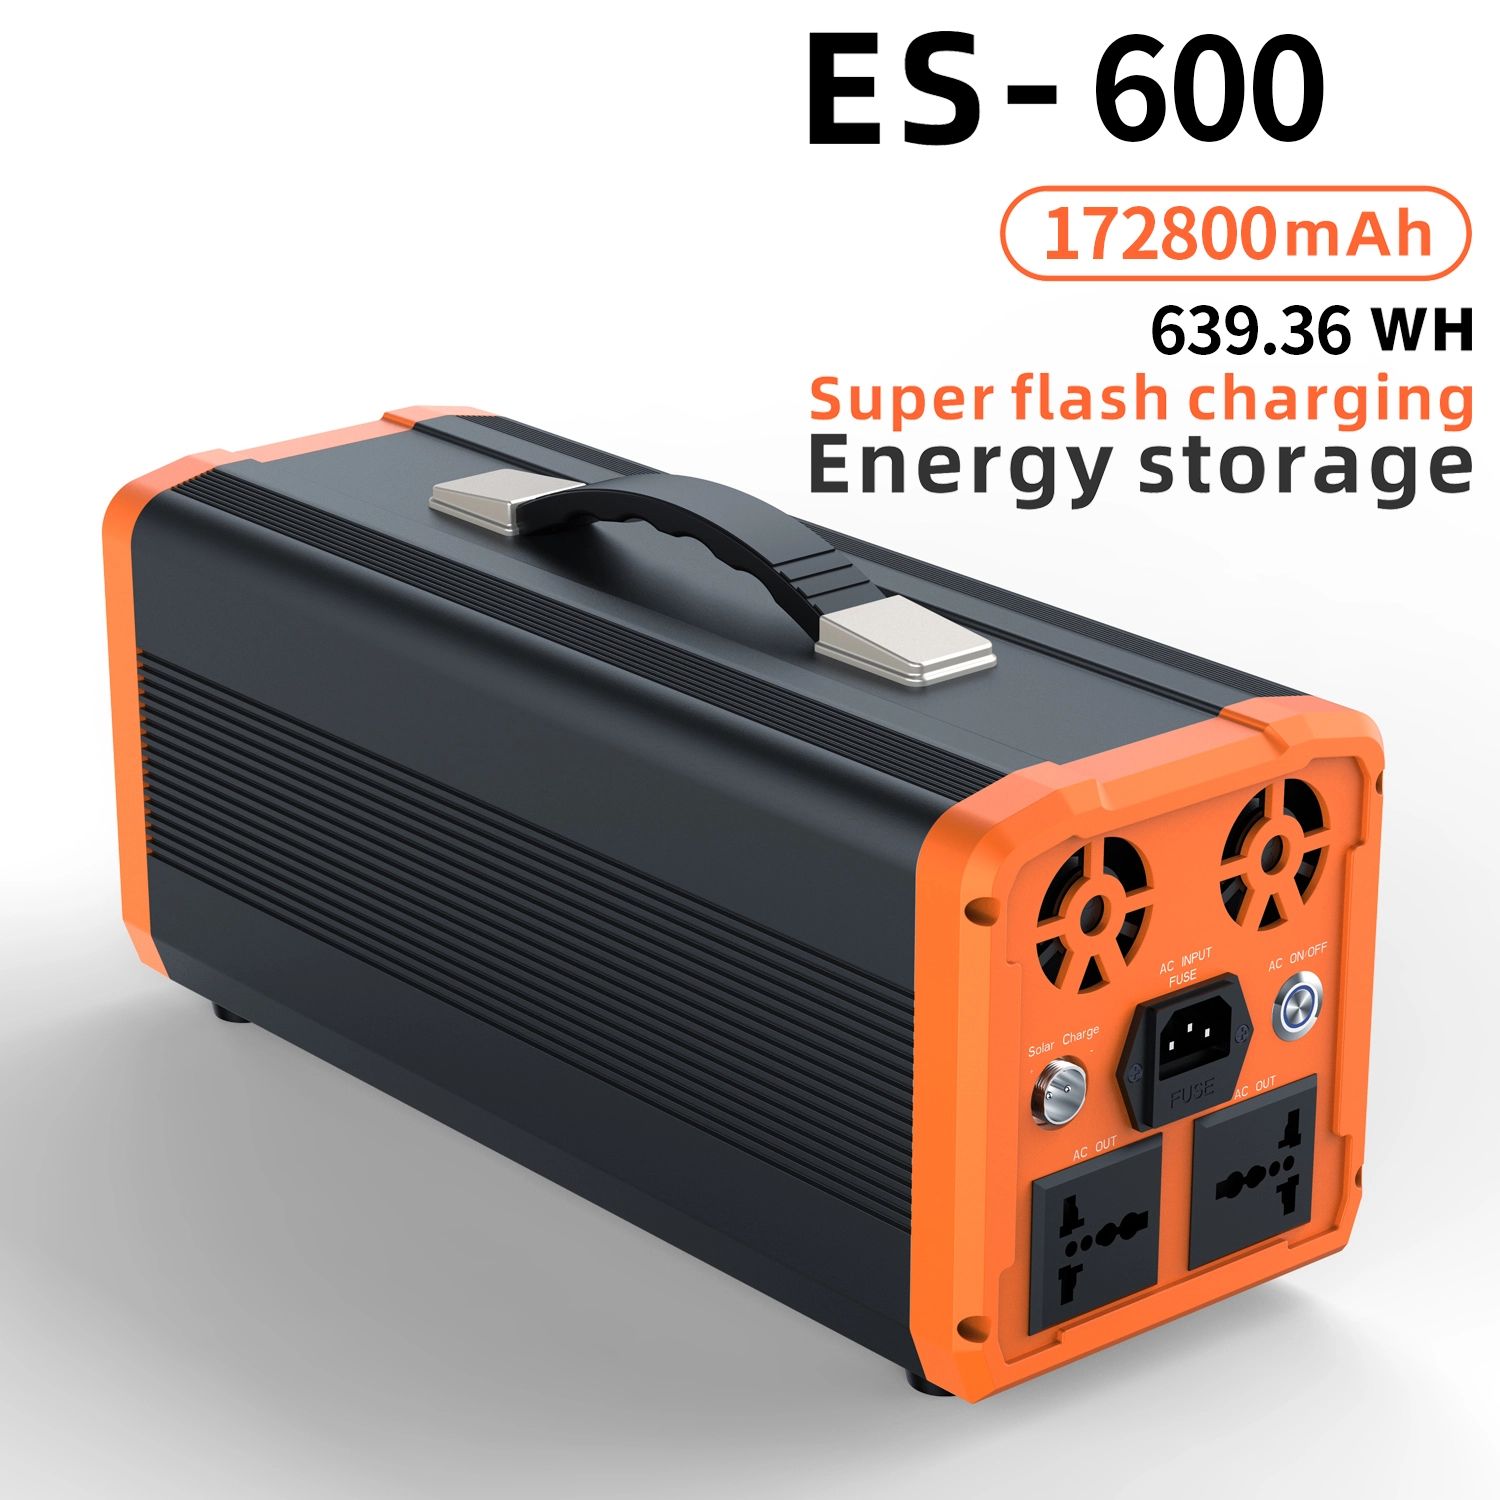 ES-600 Energy Storage Power solar inverter for outdoor use with lithium battery